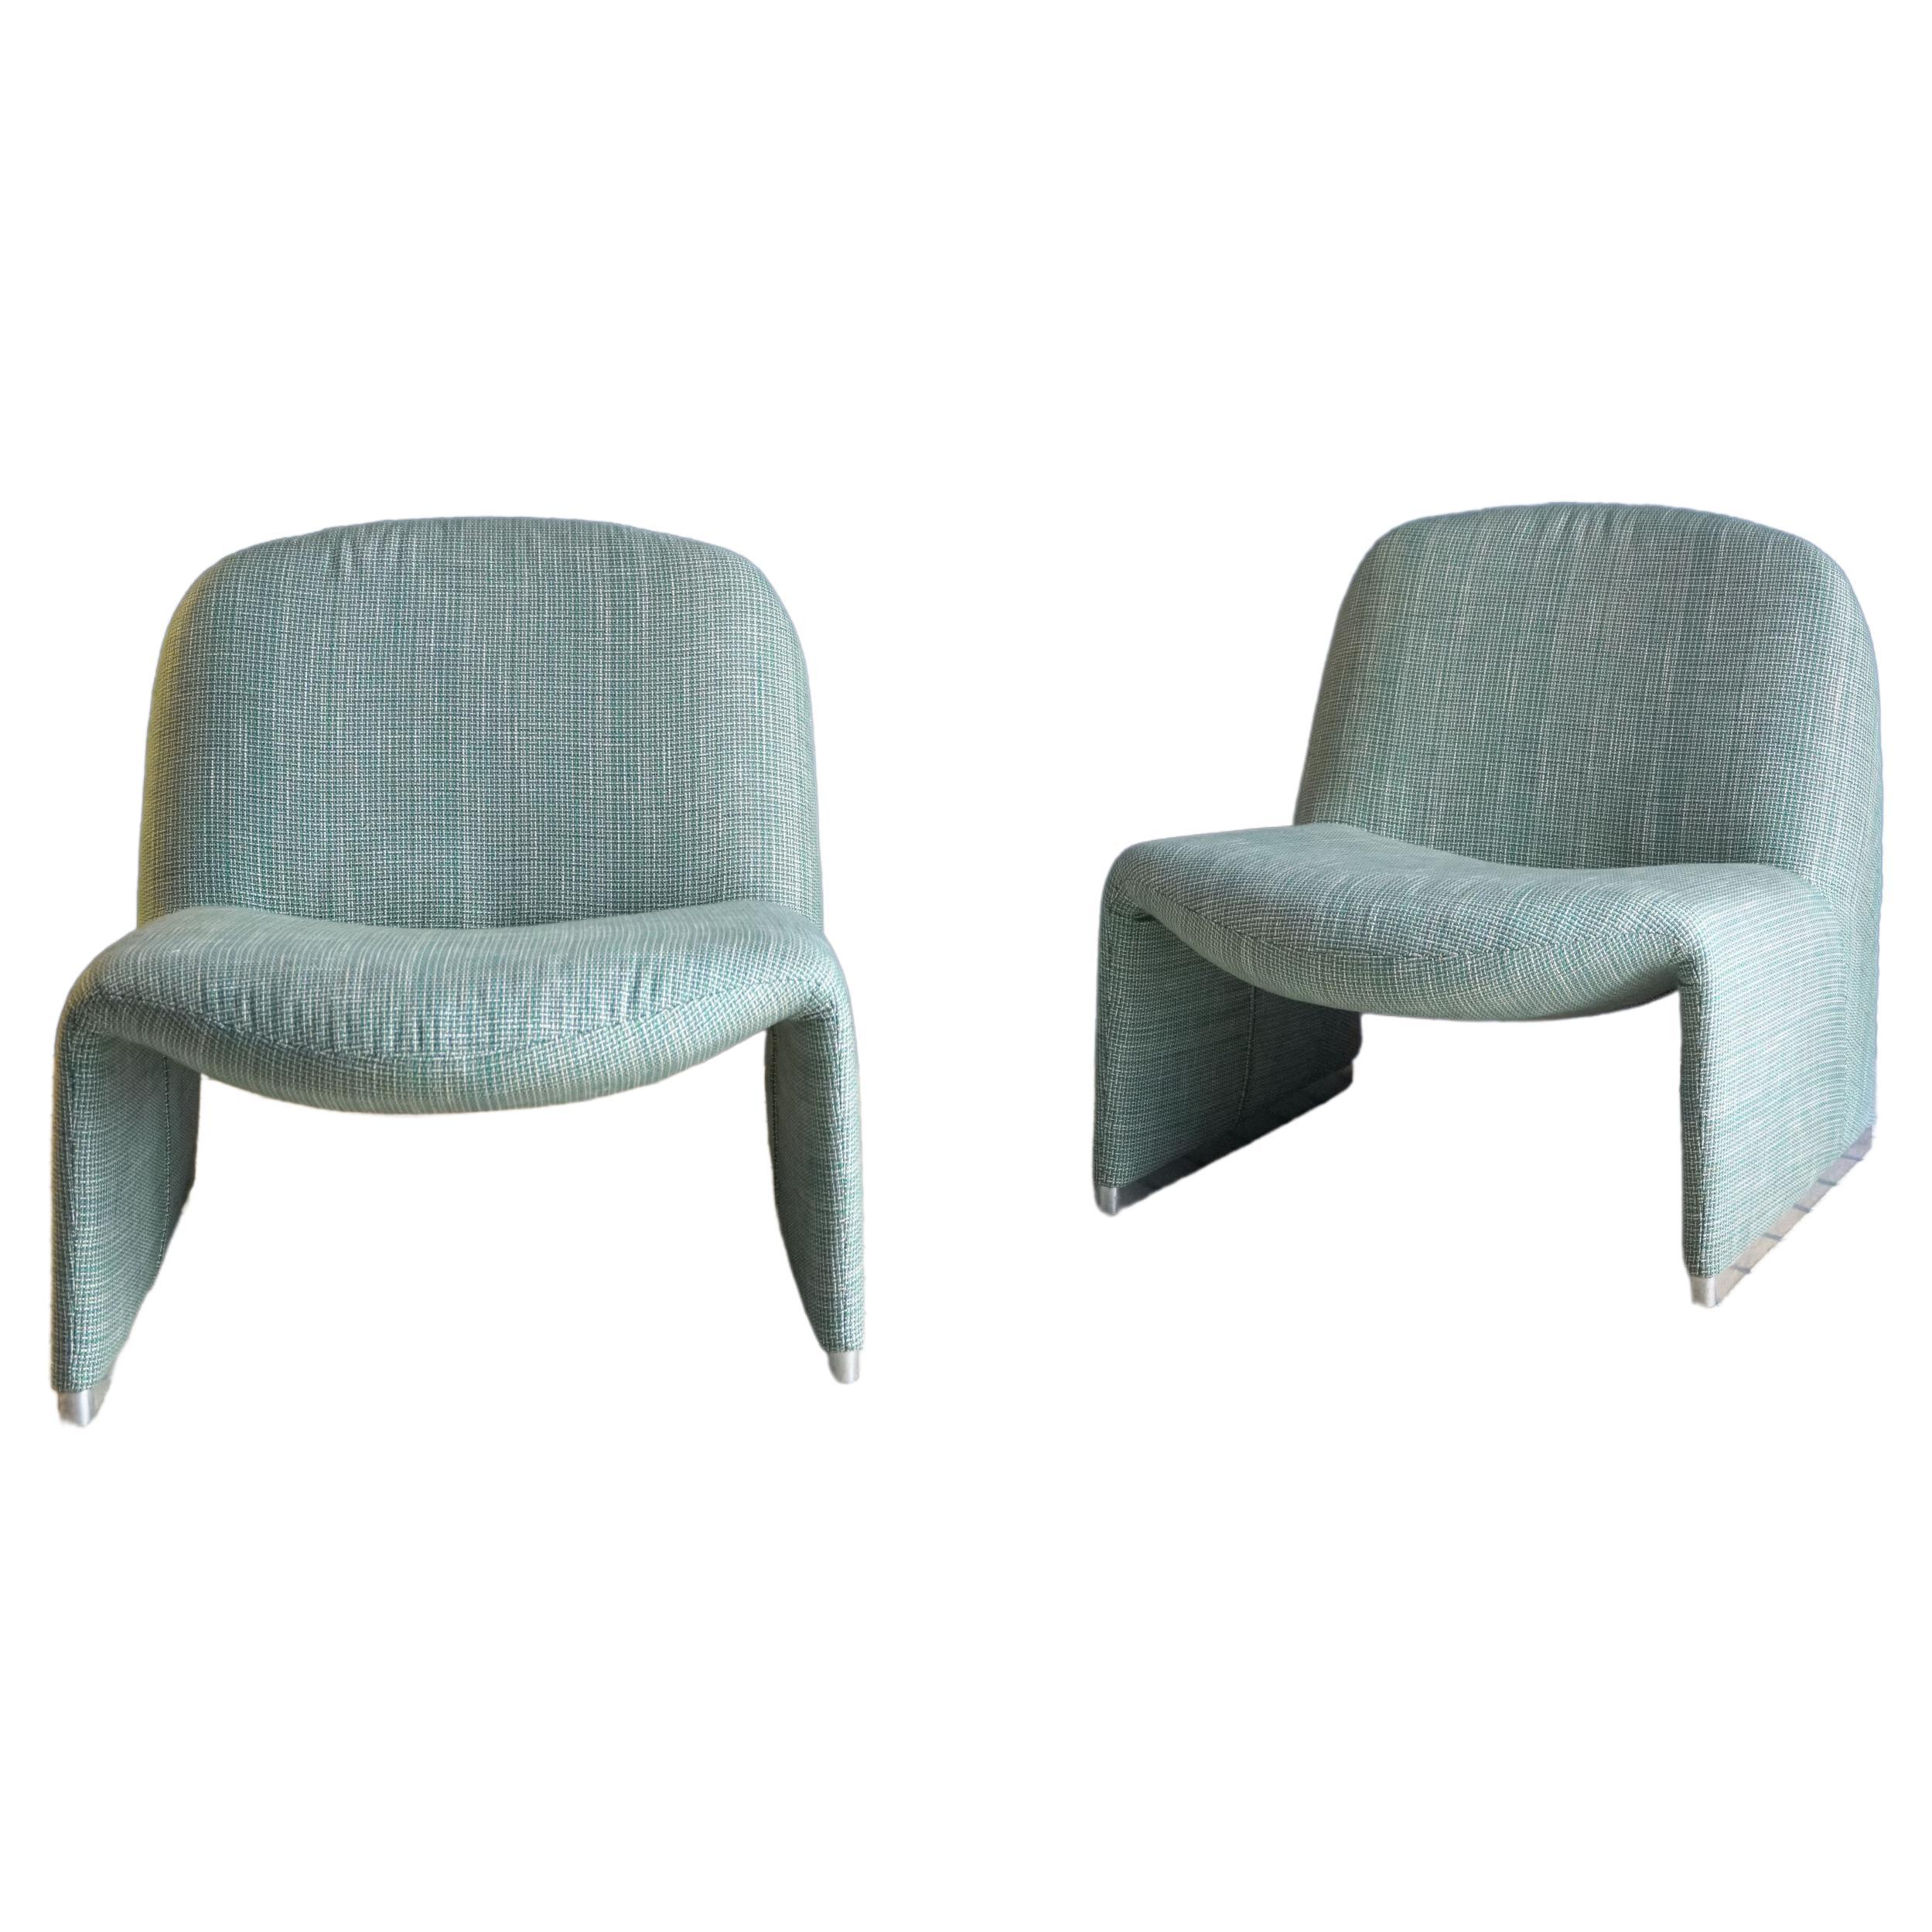 Pair of Alky Armchairs 70's by Designer Giancarlo Piretti